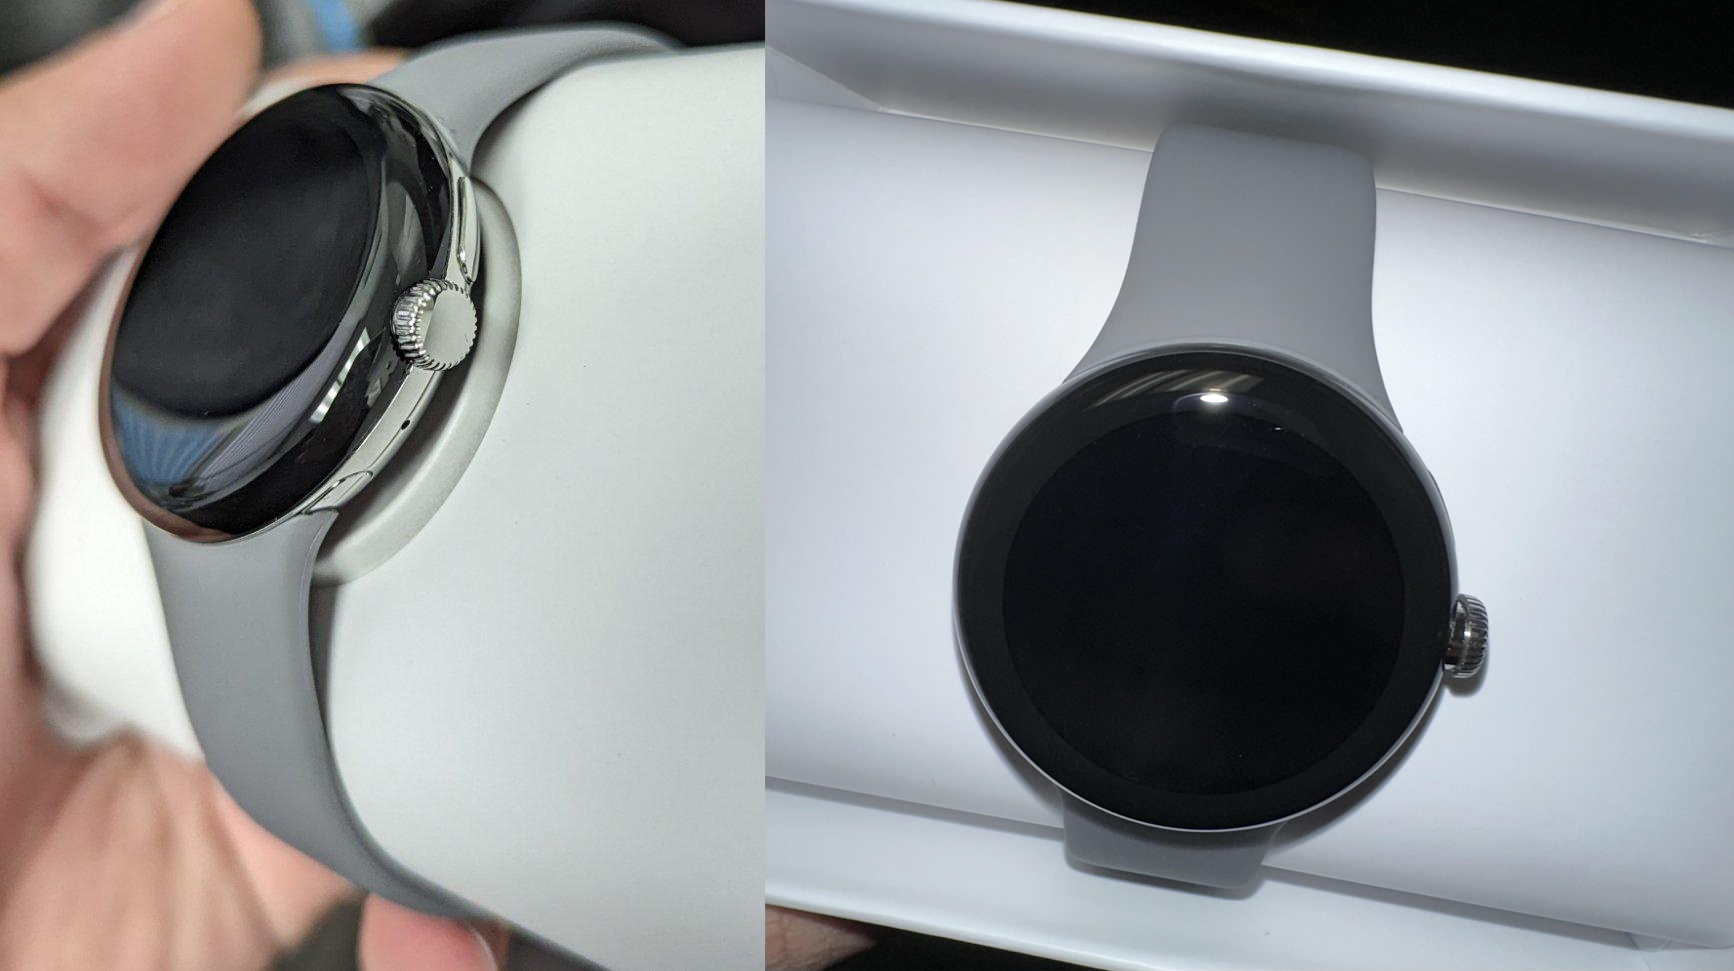 unboxing online Pixel Watch leak Early images